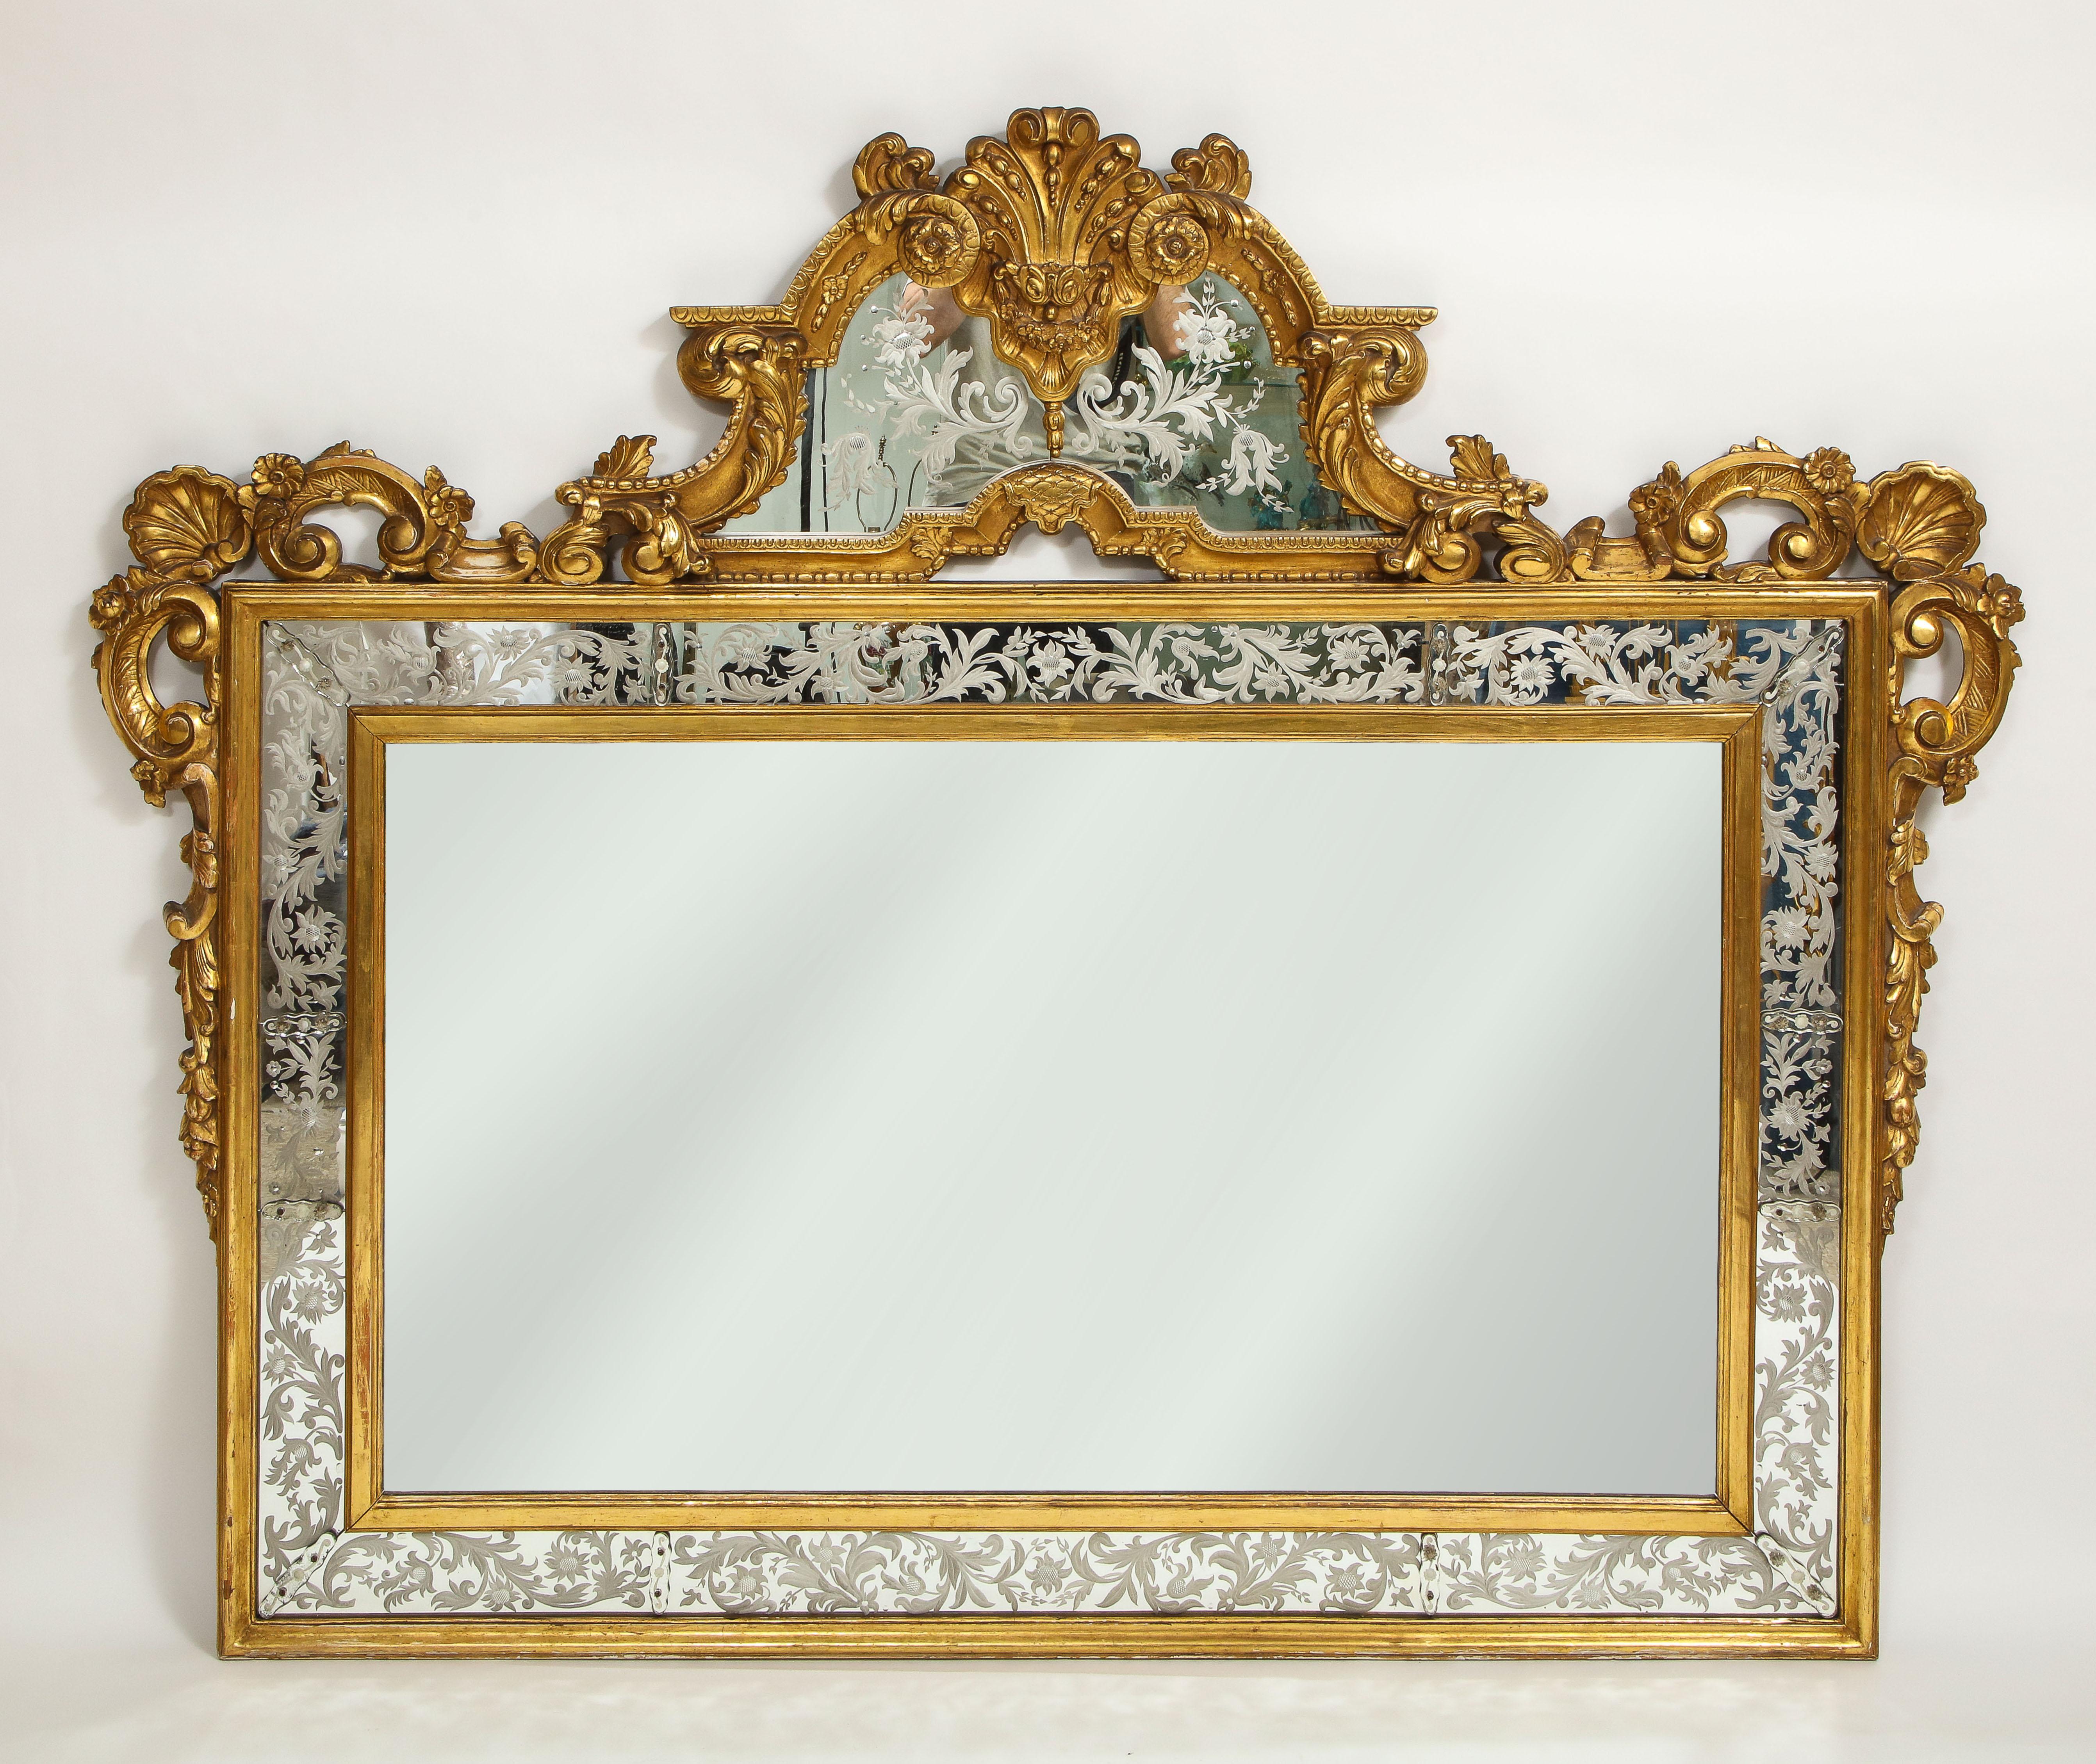 An very large and impressive Louis XVI style antique Venetian 19th century giltwood hand-etched and hand-engraved mirror. The giltwood border is all hand-carved and gilded in the finest quality 24K gold leaf. The rectangular body is hand-carved with